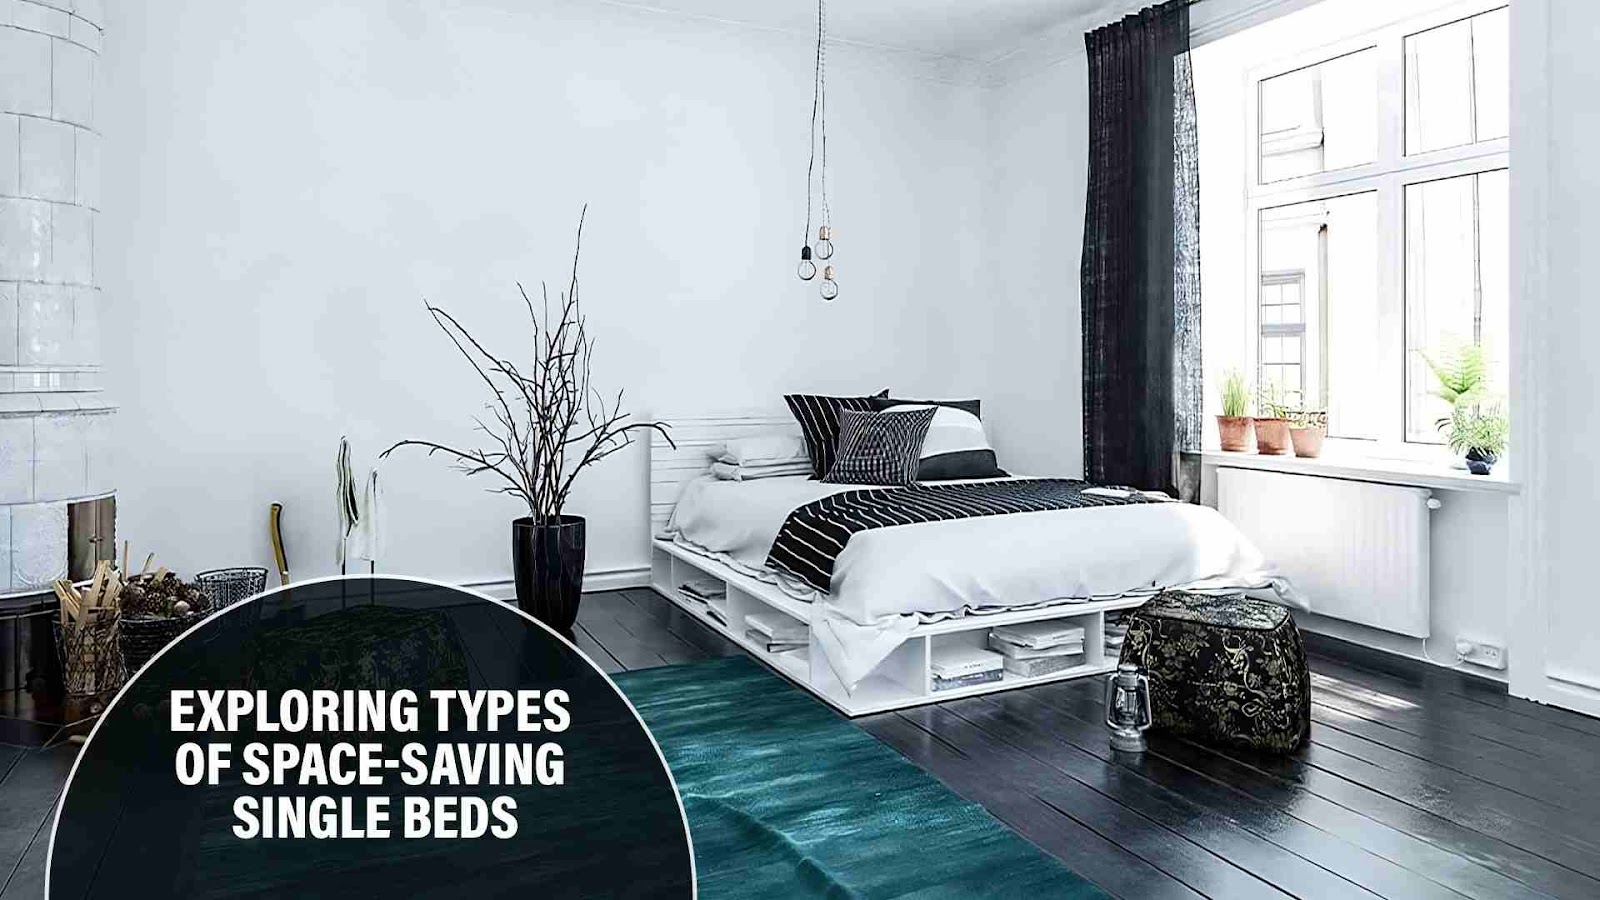 Exploring Types of Space-Saving Single Beds: